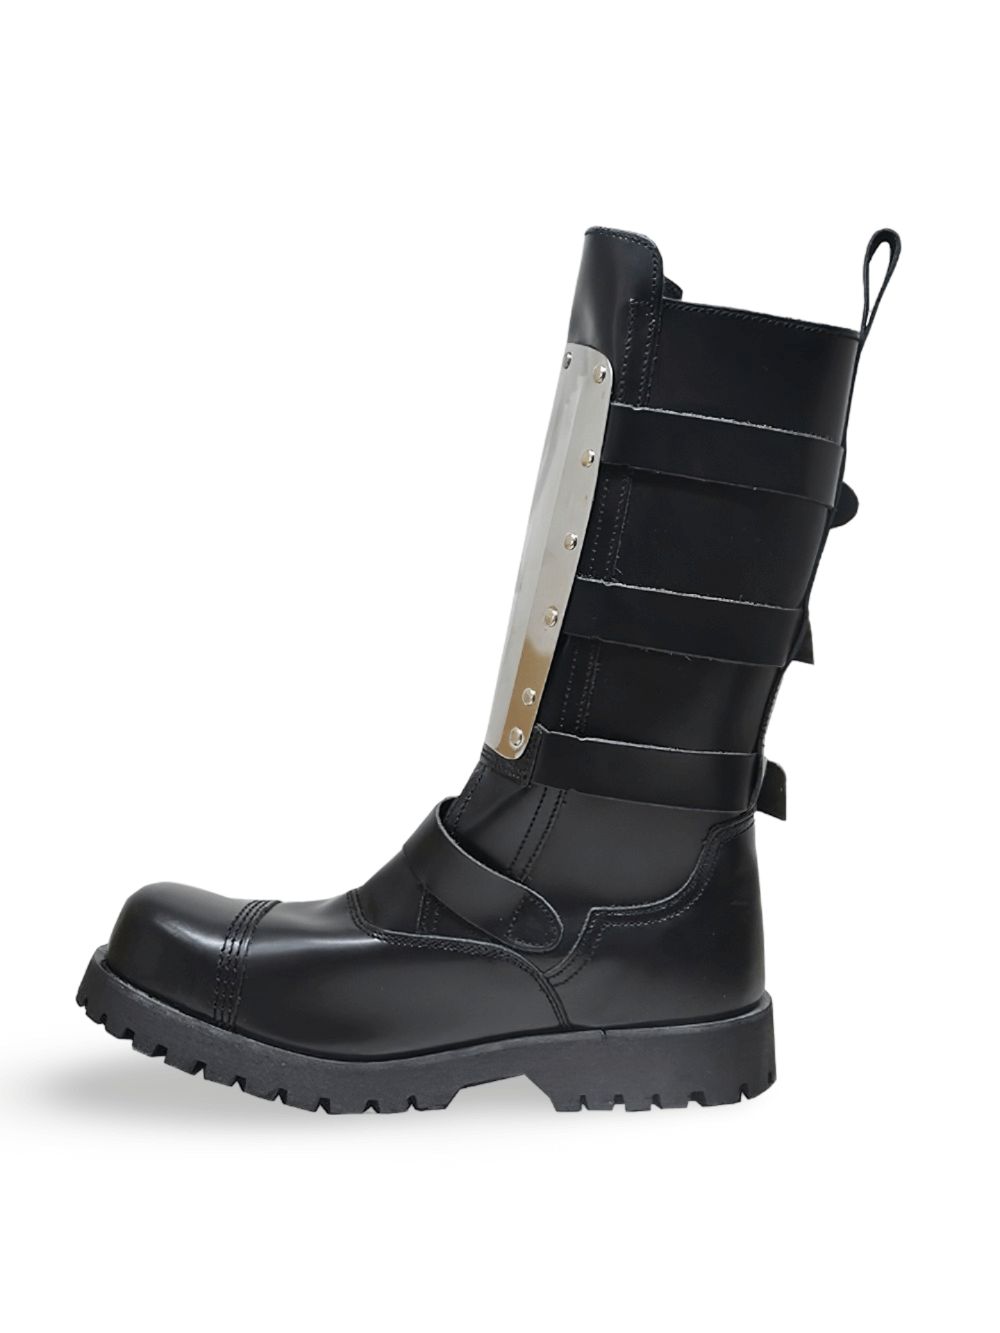 Black Buckle Boots with Round Toe and Platform Sole